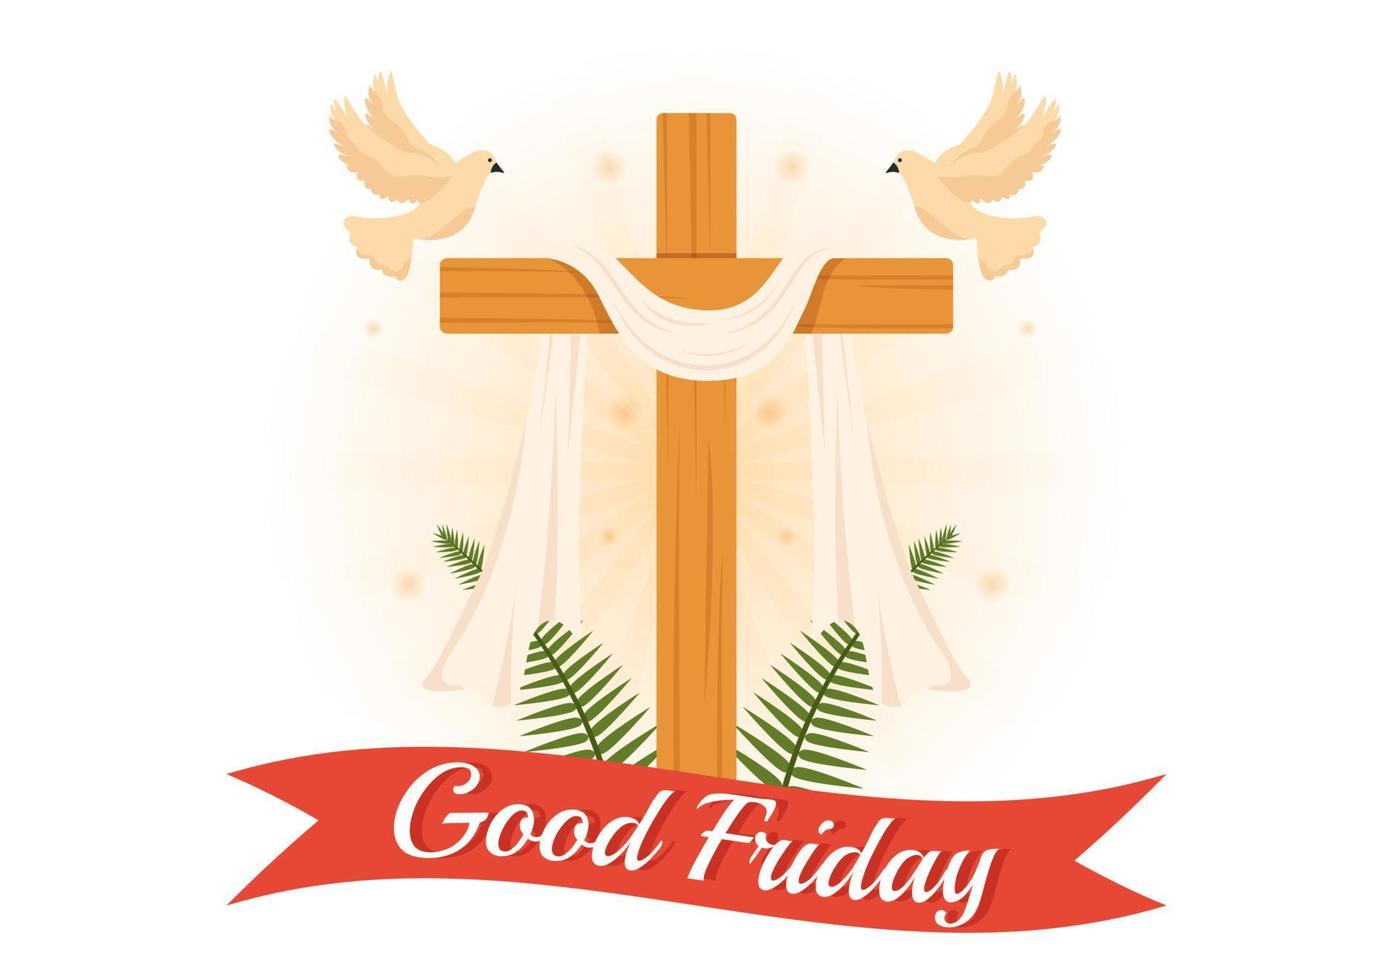 Happy Good Friday Illustration with Christian Holiday of Jesus ...